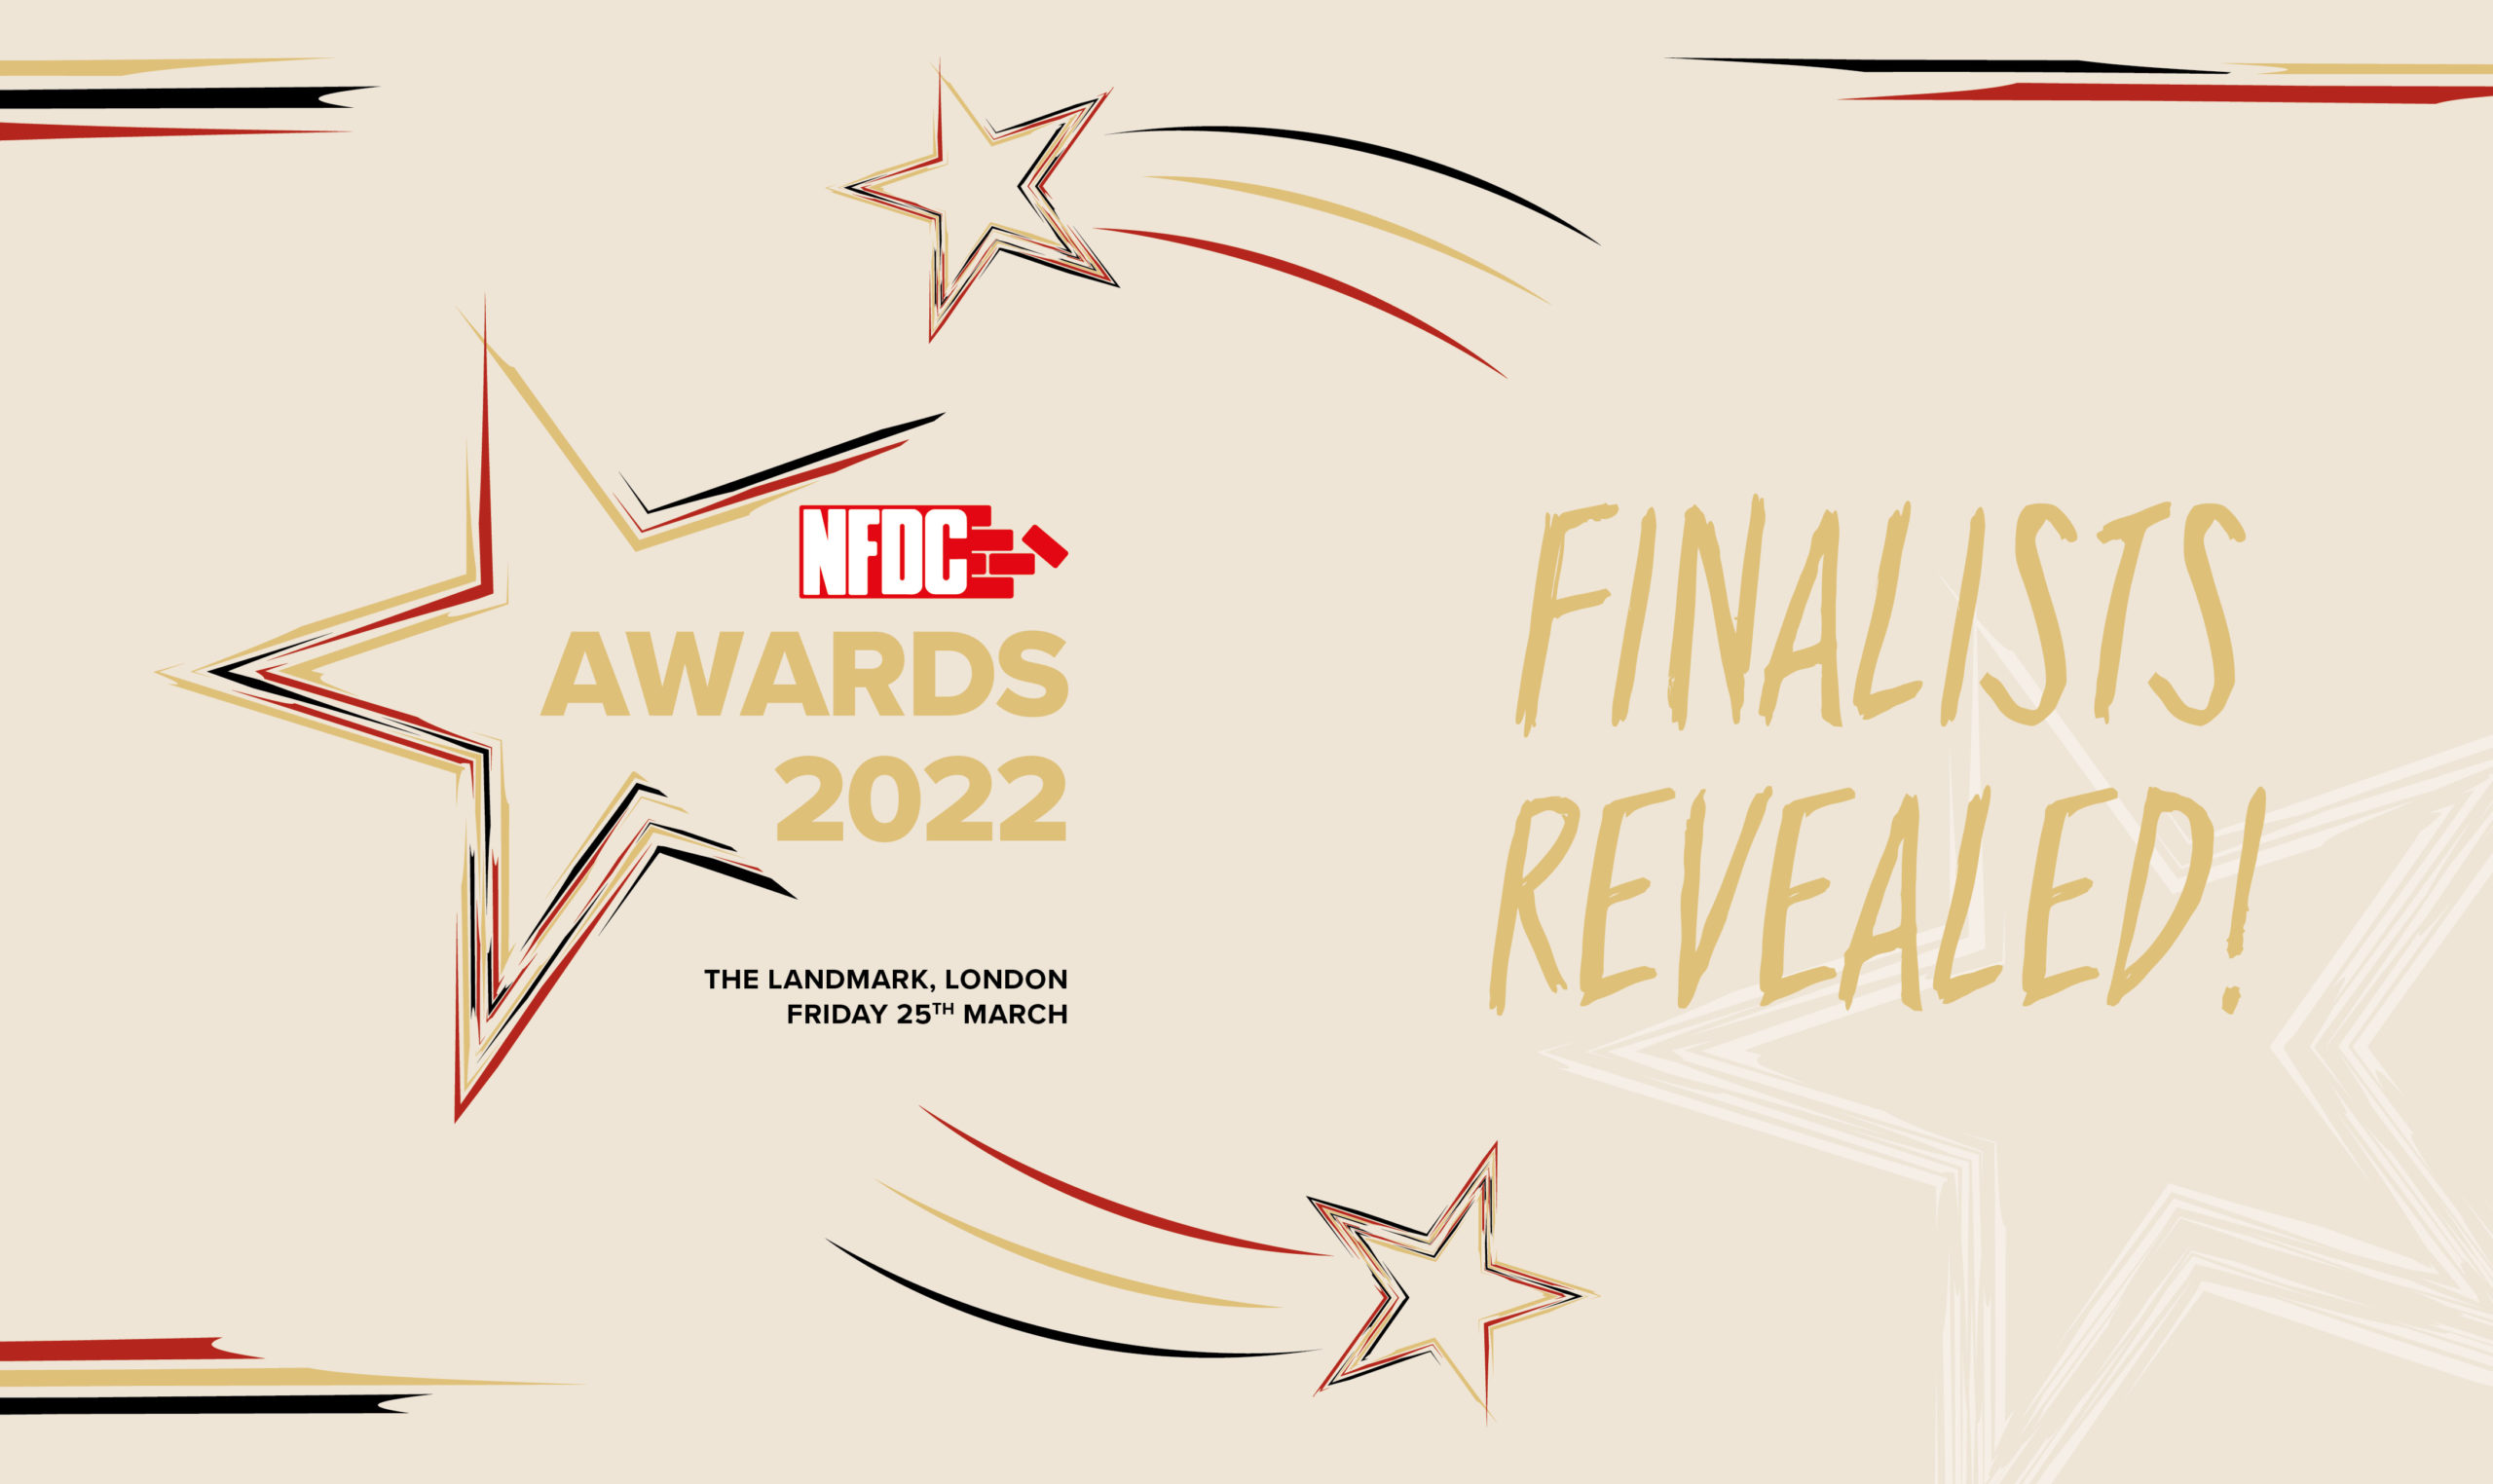 Finalists Announced for NFDC Awards 2022